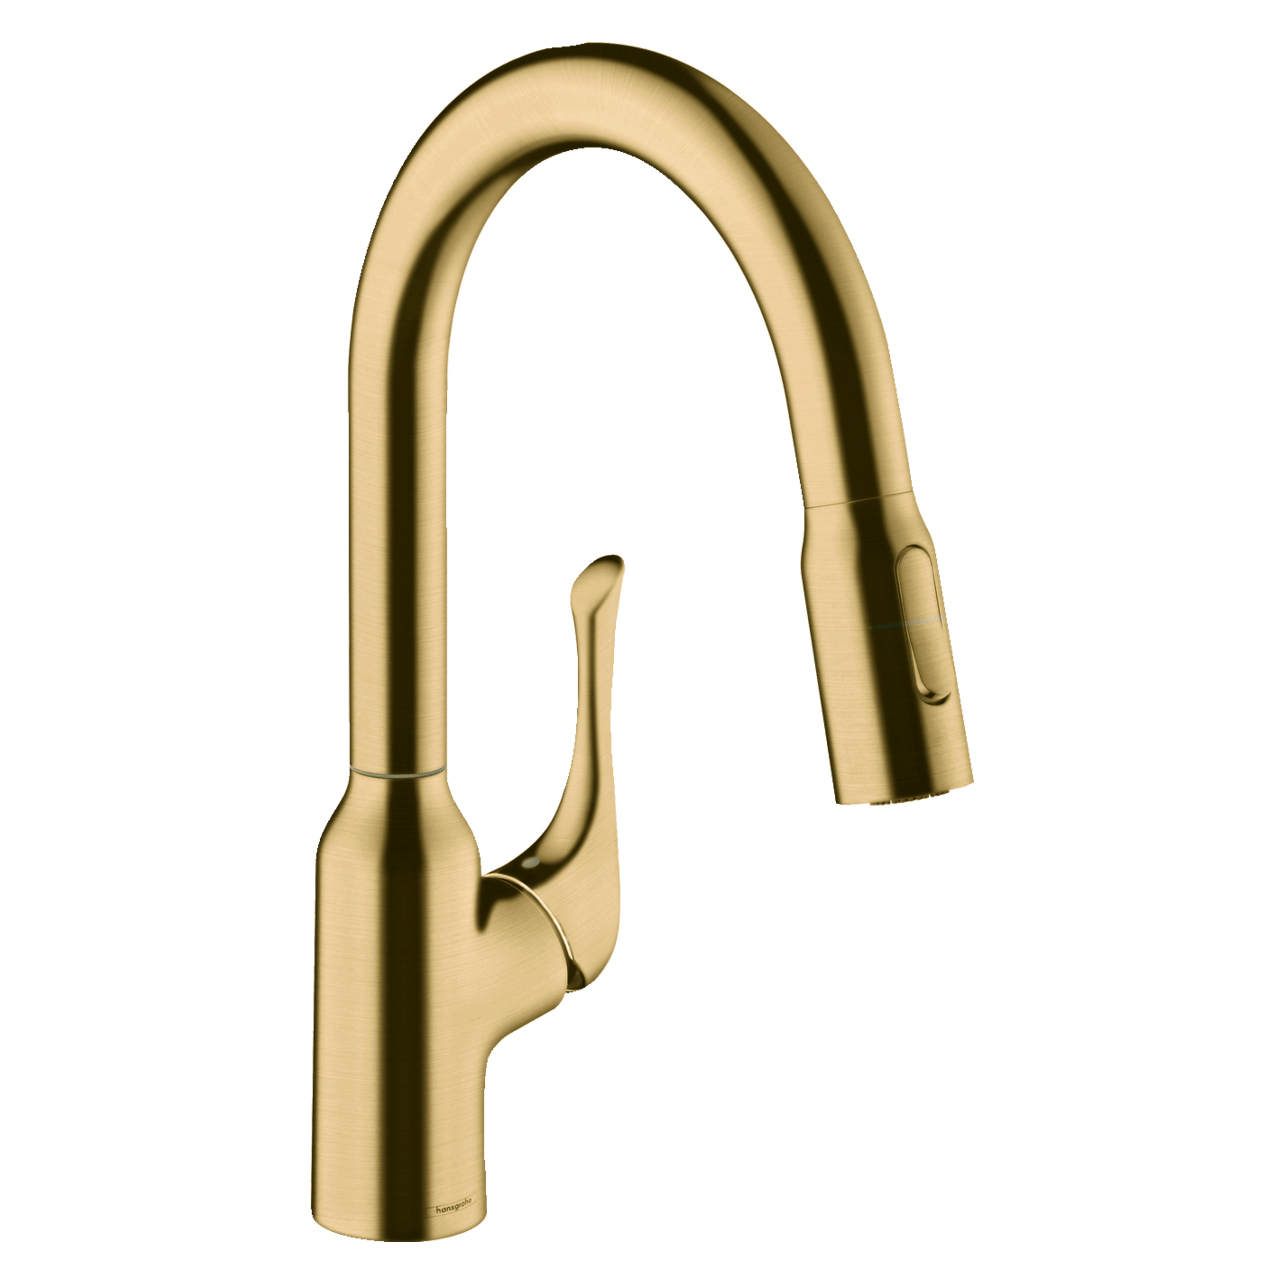 Allegro N Pull-Down Prep Kitchen Faucet in Brushed Gold Optic, 1.75 gpm